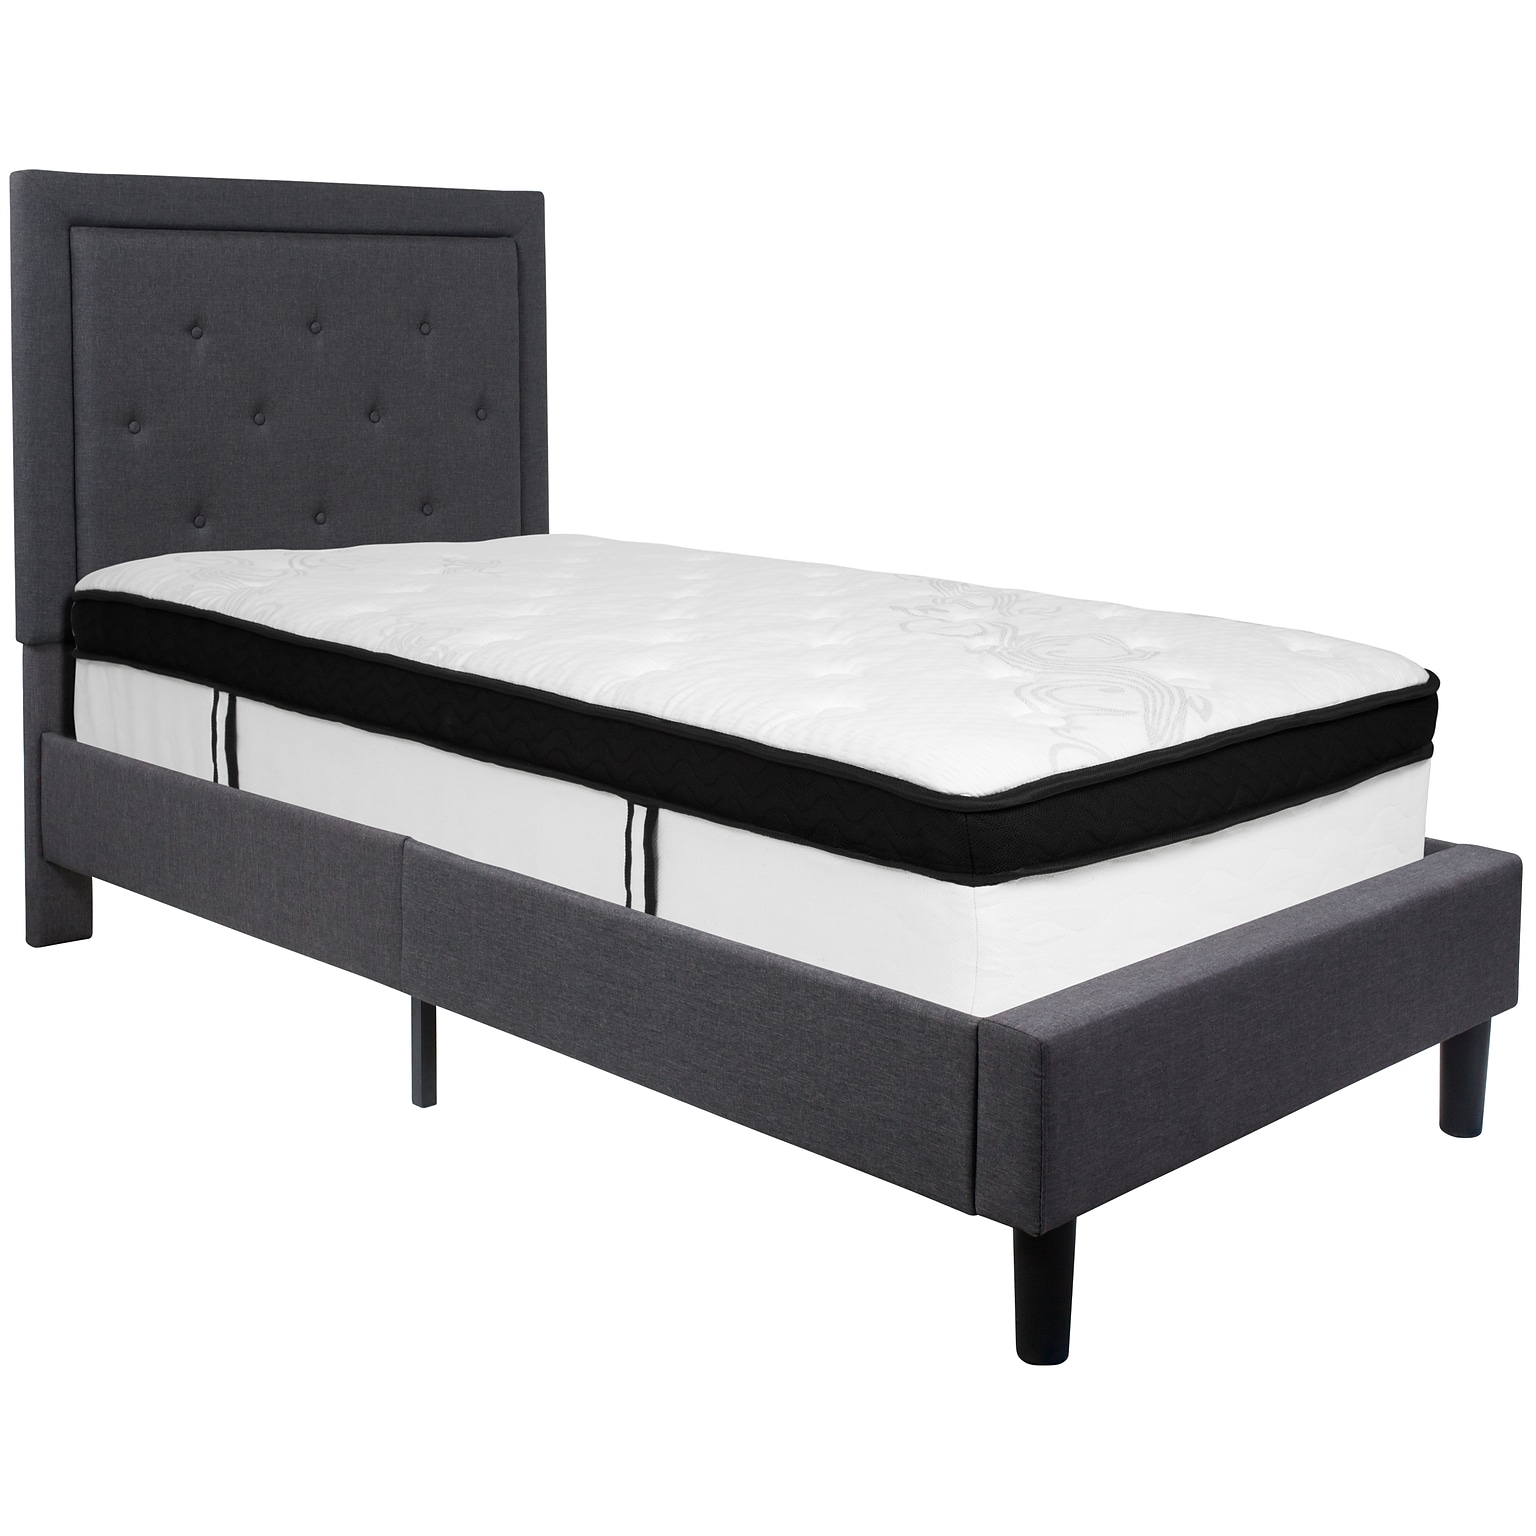 Flash Furniture Roxbury Tufted Upholstered Platform Bed in Dark Gray Fabric with Memory Foam Mattress, Twin (SLBMF29)